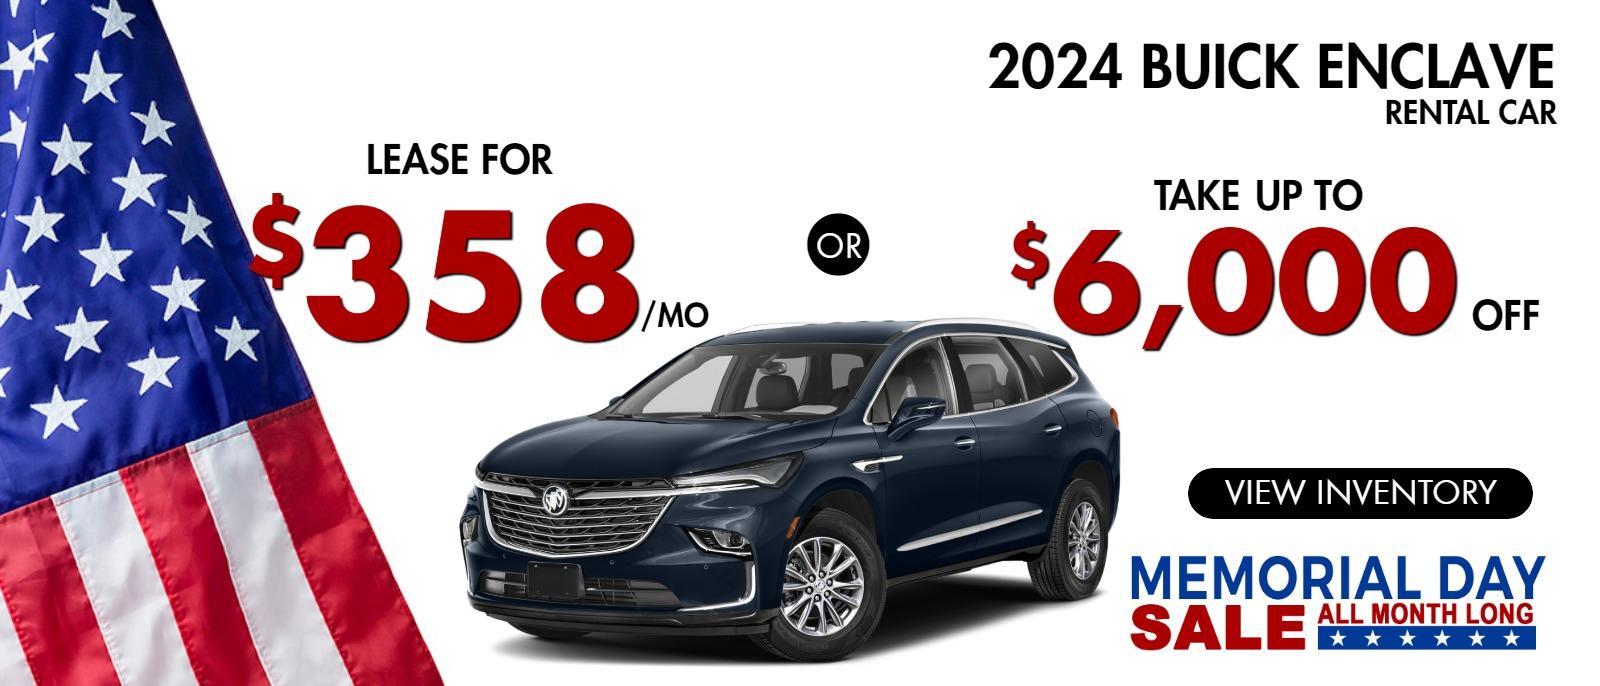 2024 Enclave 
RENTAL CAR
Stock #L2601

LEASE FOR  $358/mo  $2999 DOWN
 OR
 take up to $6,000 OFF